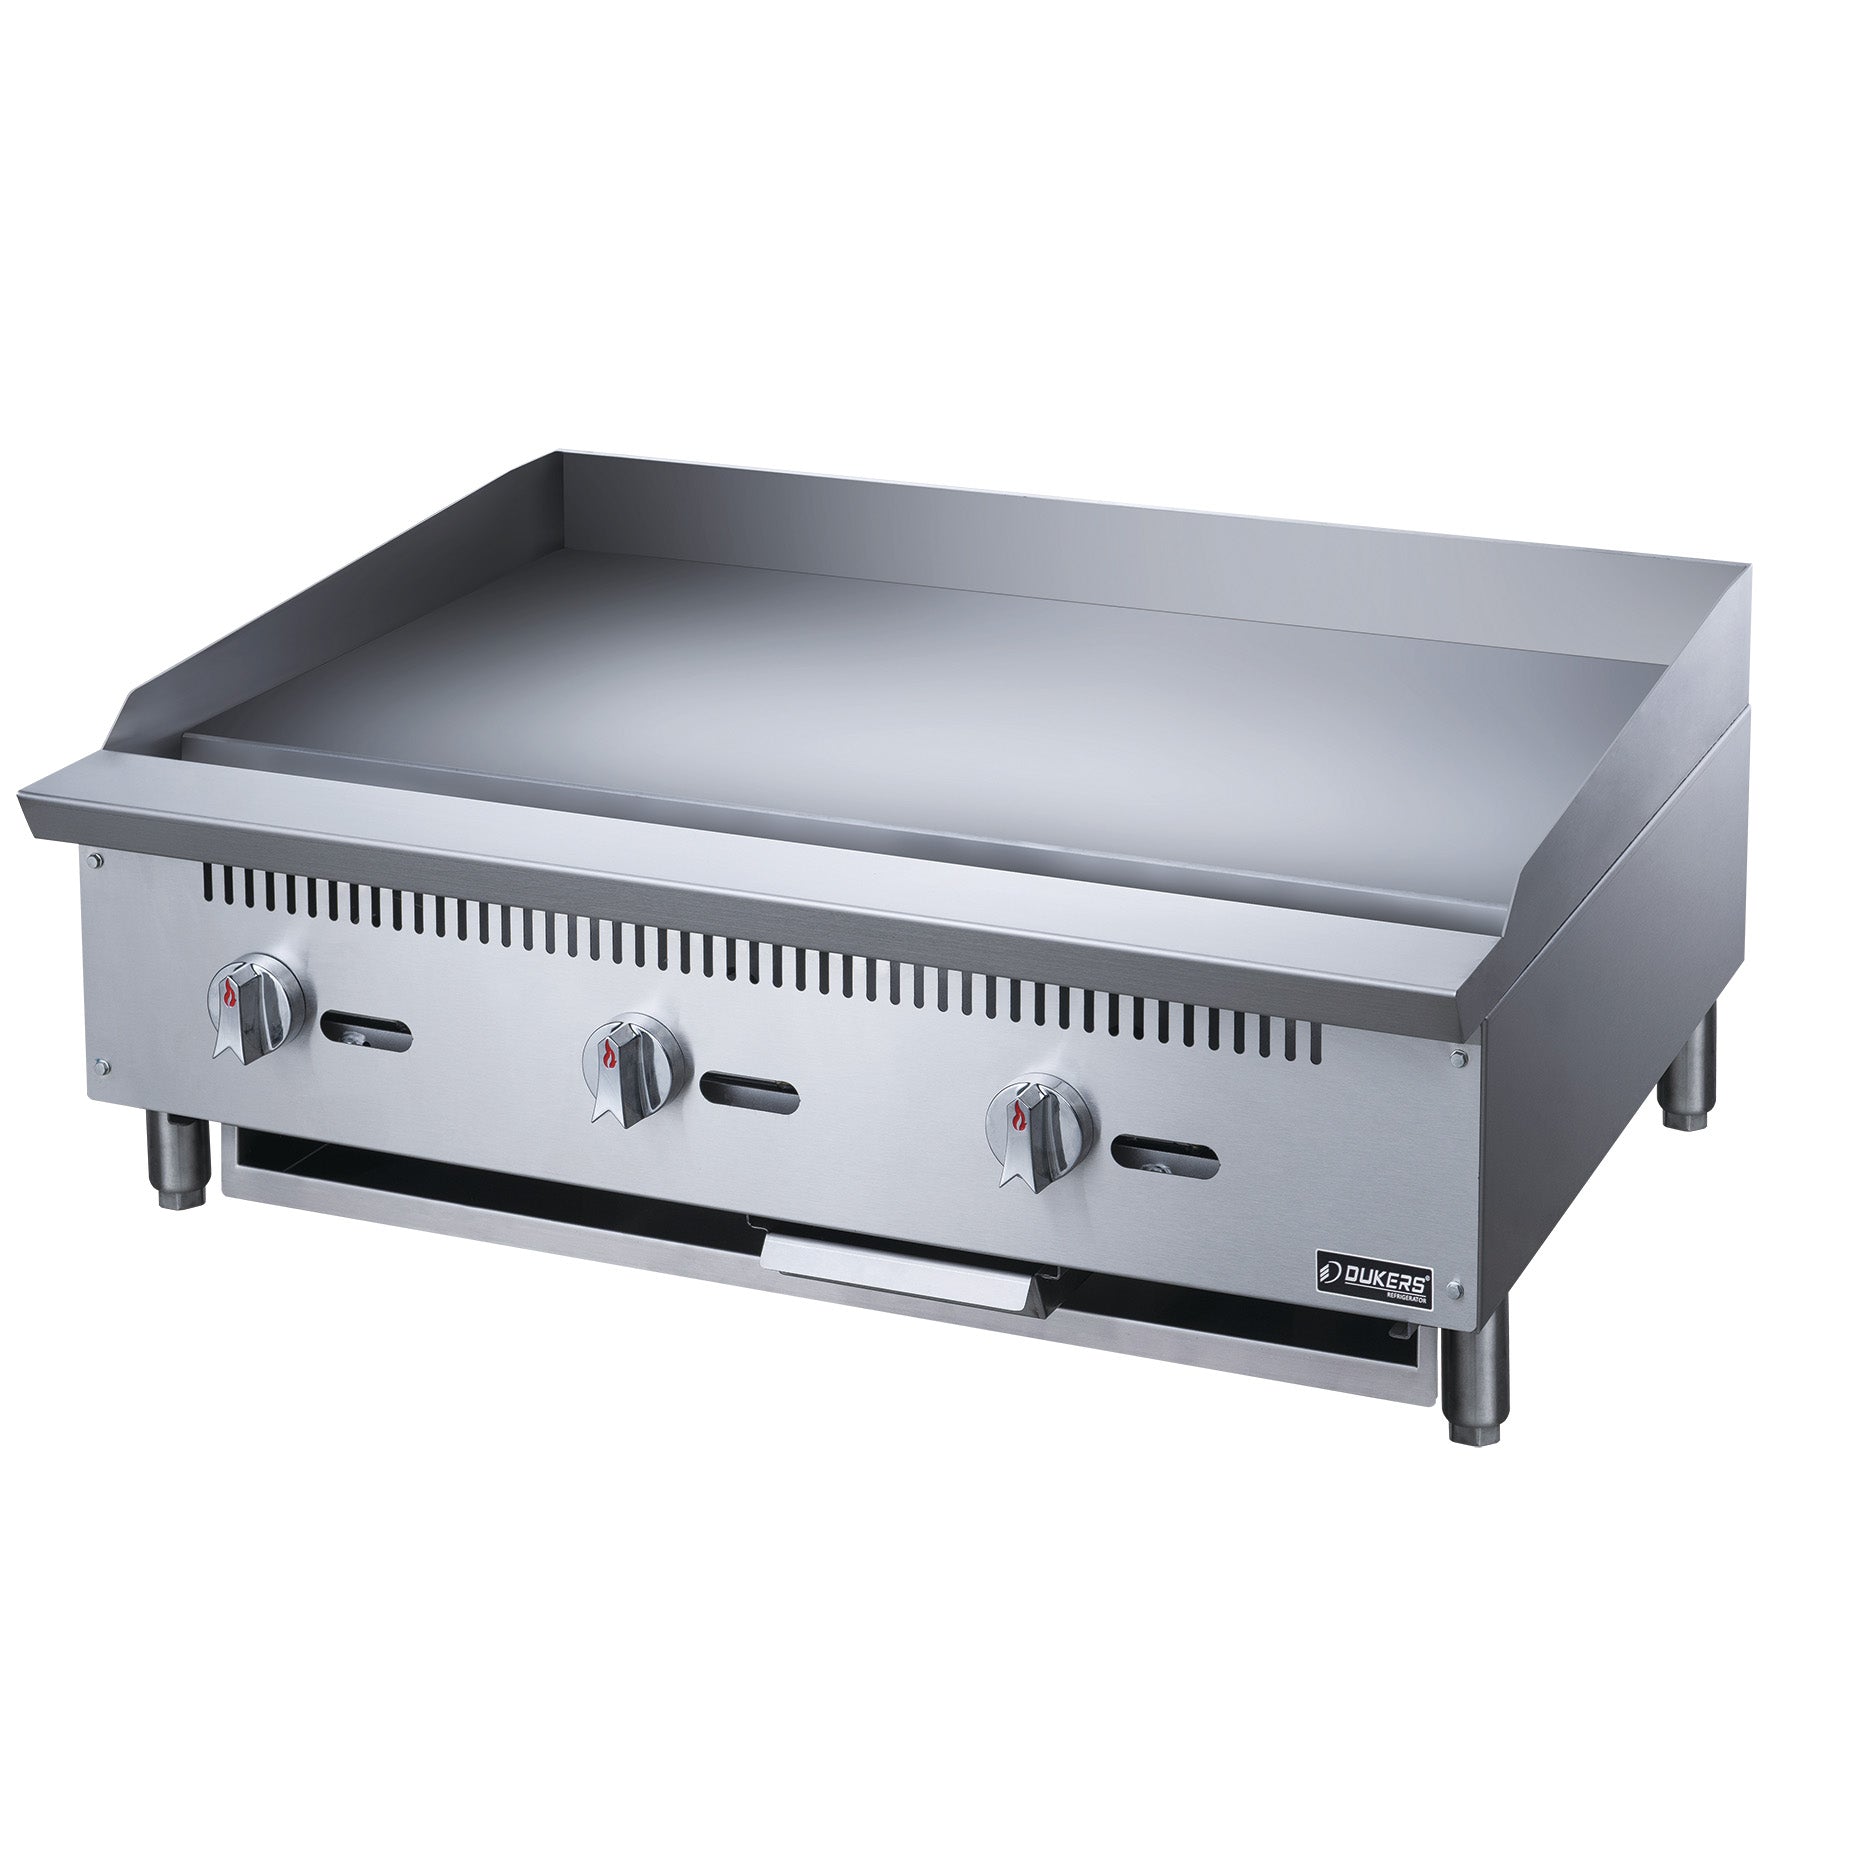 Dukers - DCGM36, Commercial 36" Griddle with 3 Burners